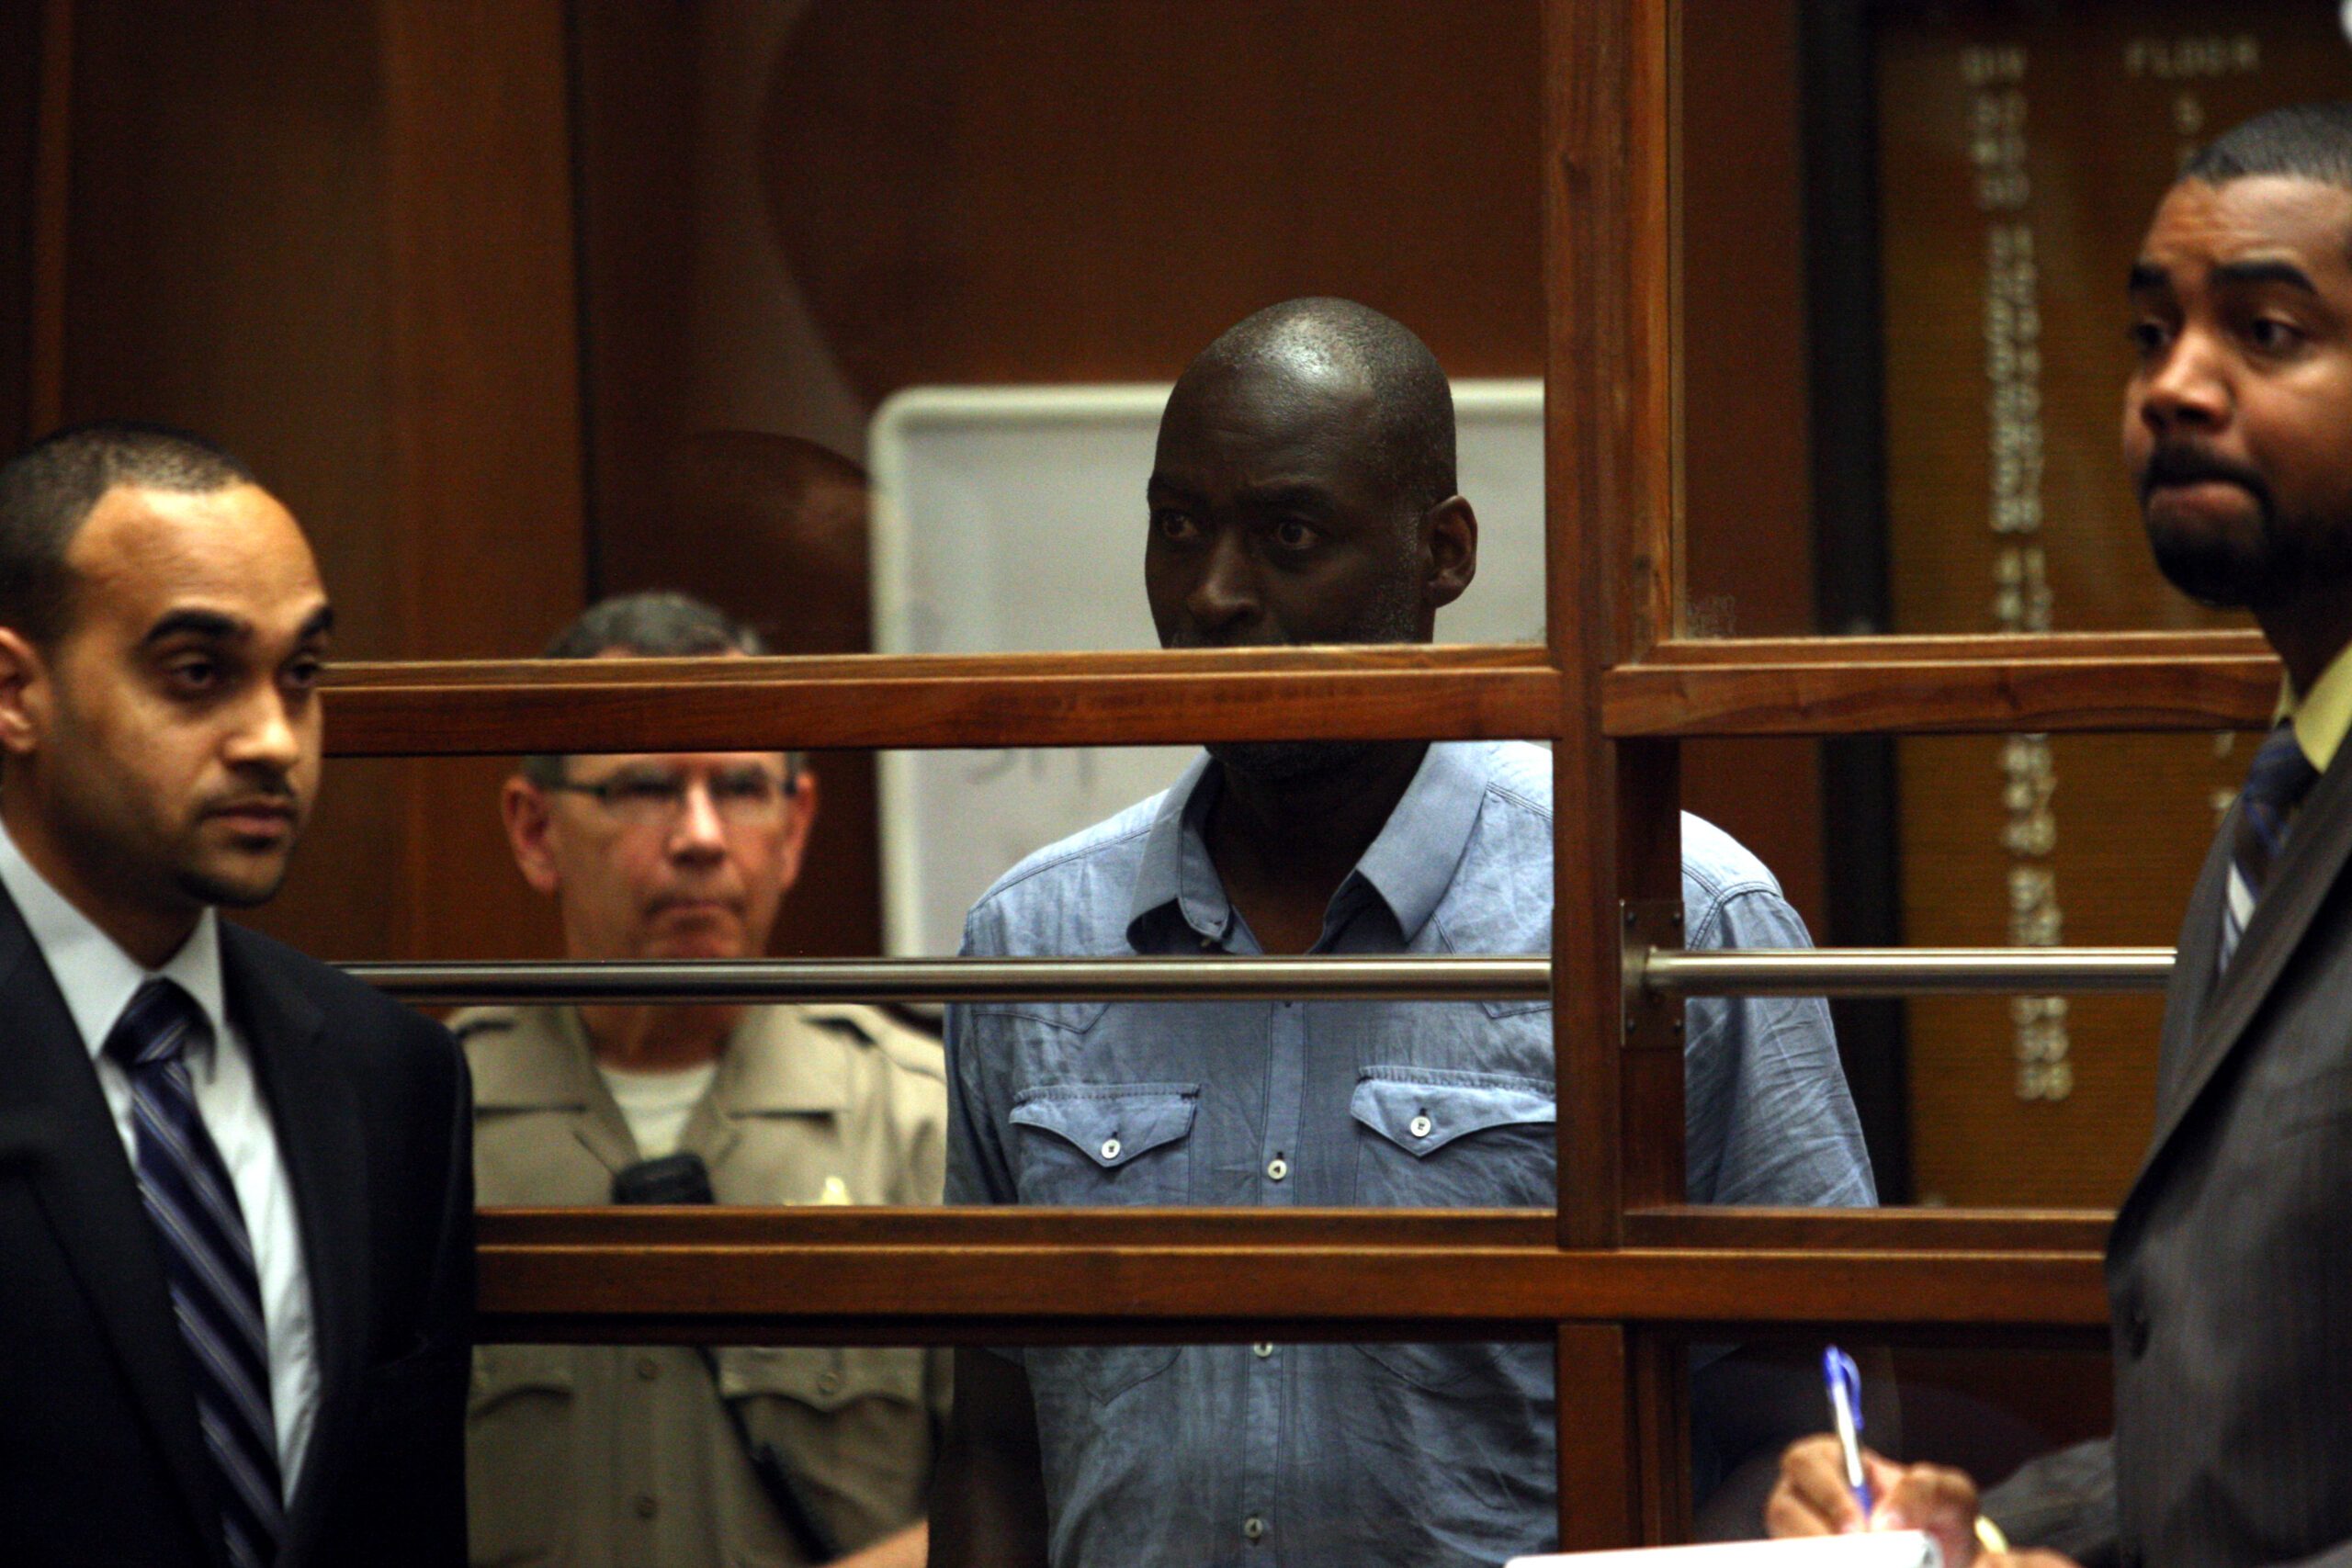 ‘Shield’ actor Michael Jace taunted and shot dead wife, court told